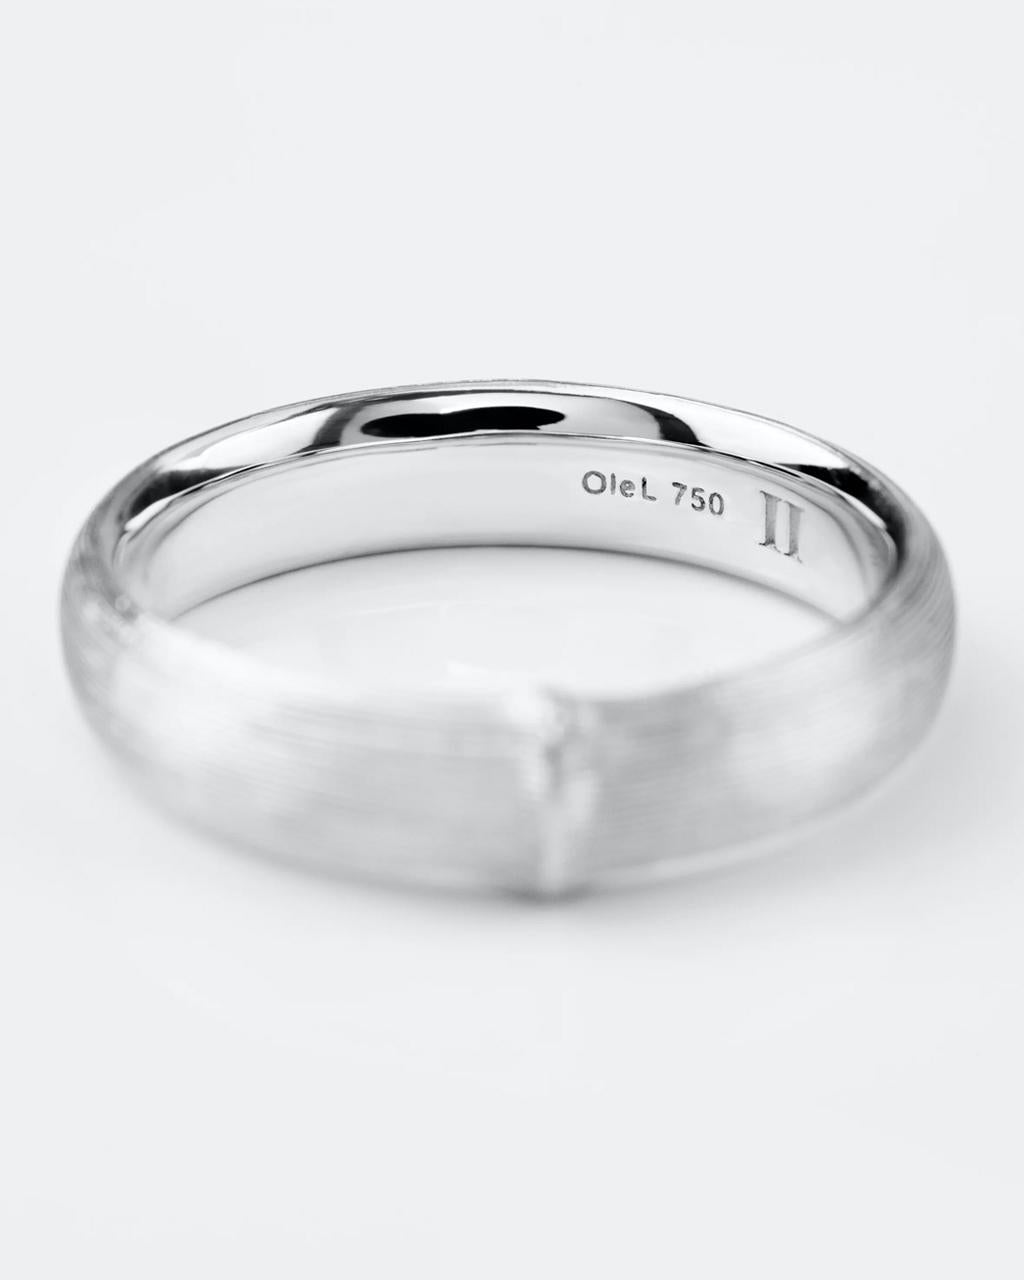 Ole Lynggaard 'Nature' Men's White Gold Ring